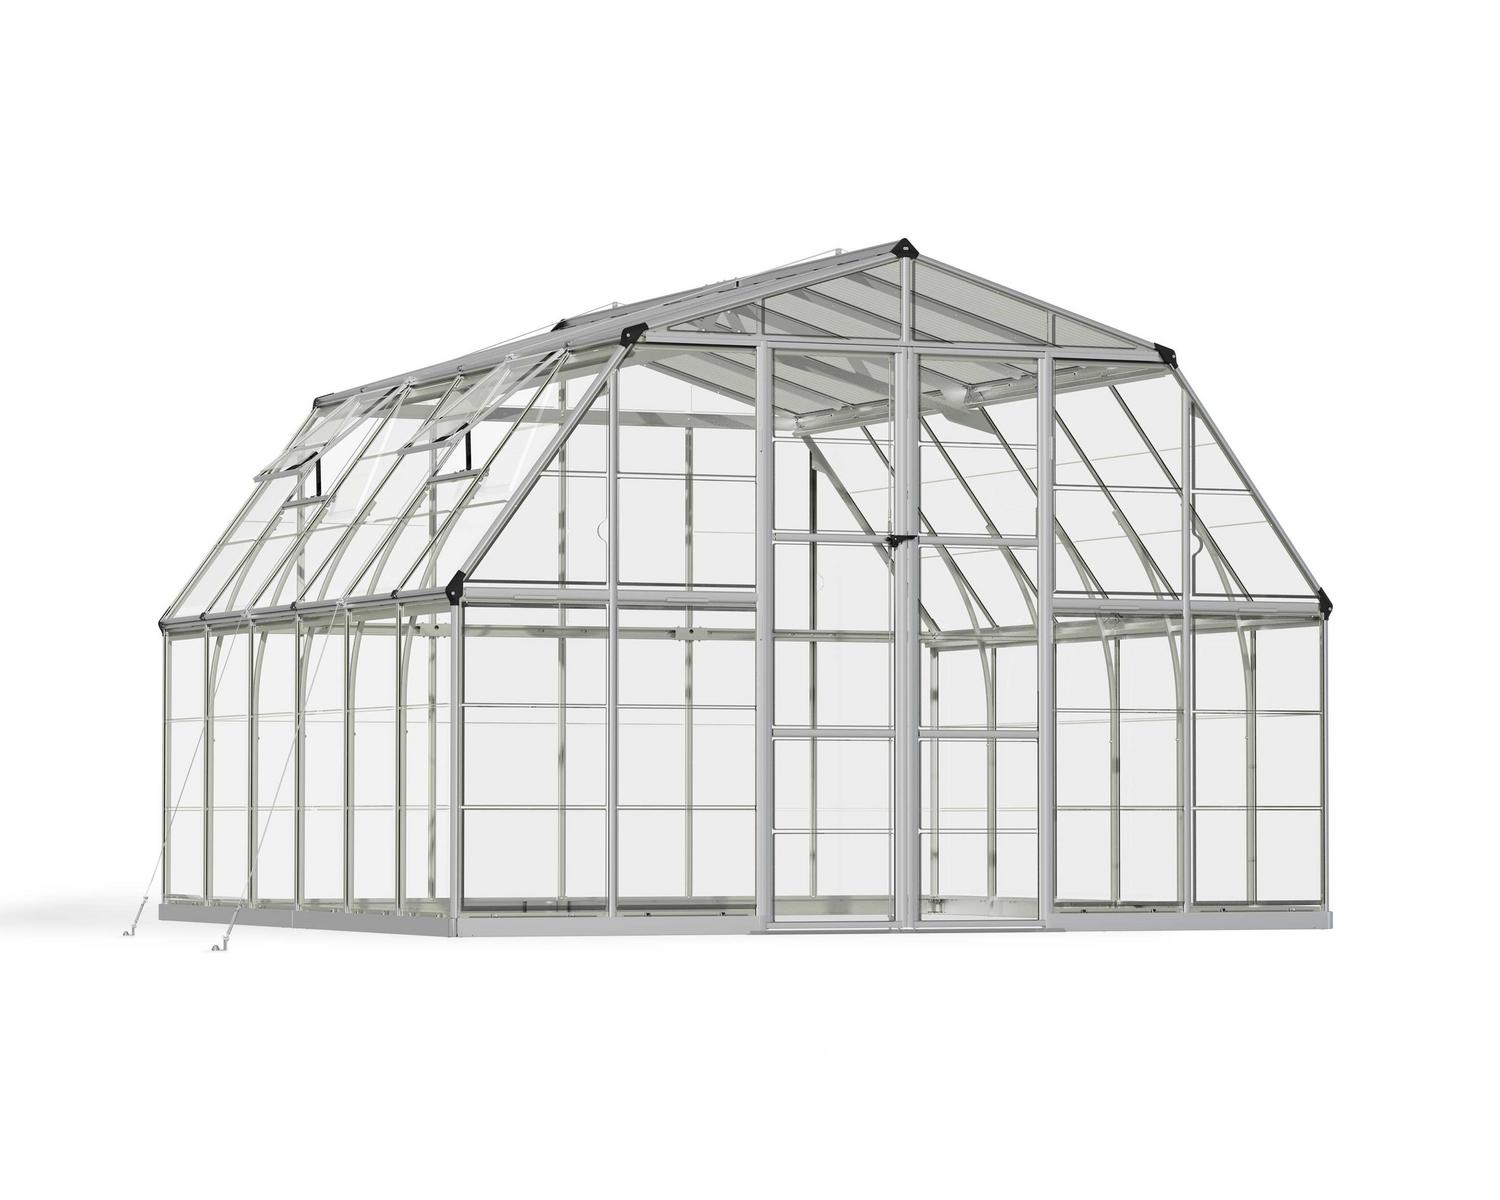 Greenhouse Americana 12' x 12' Kit - Silver Structure & Clear Glazing